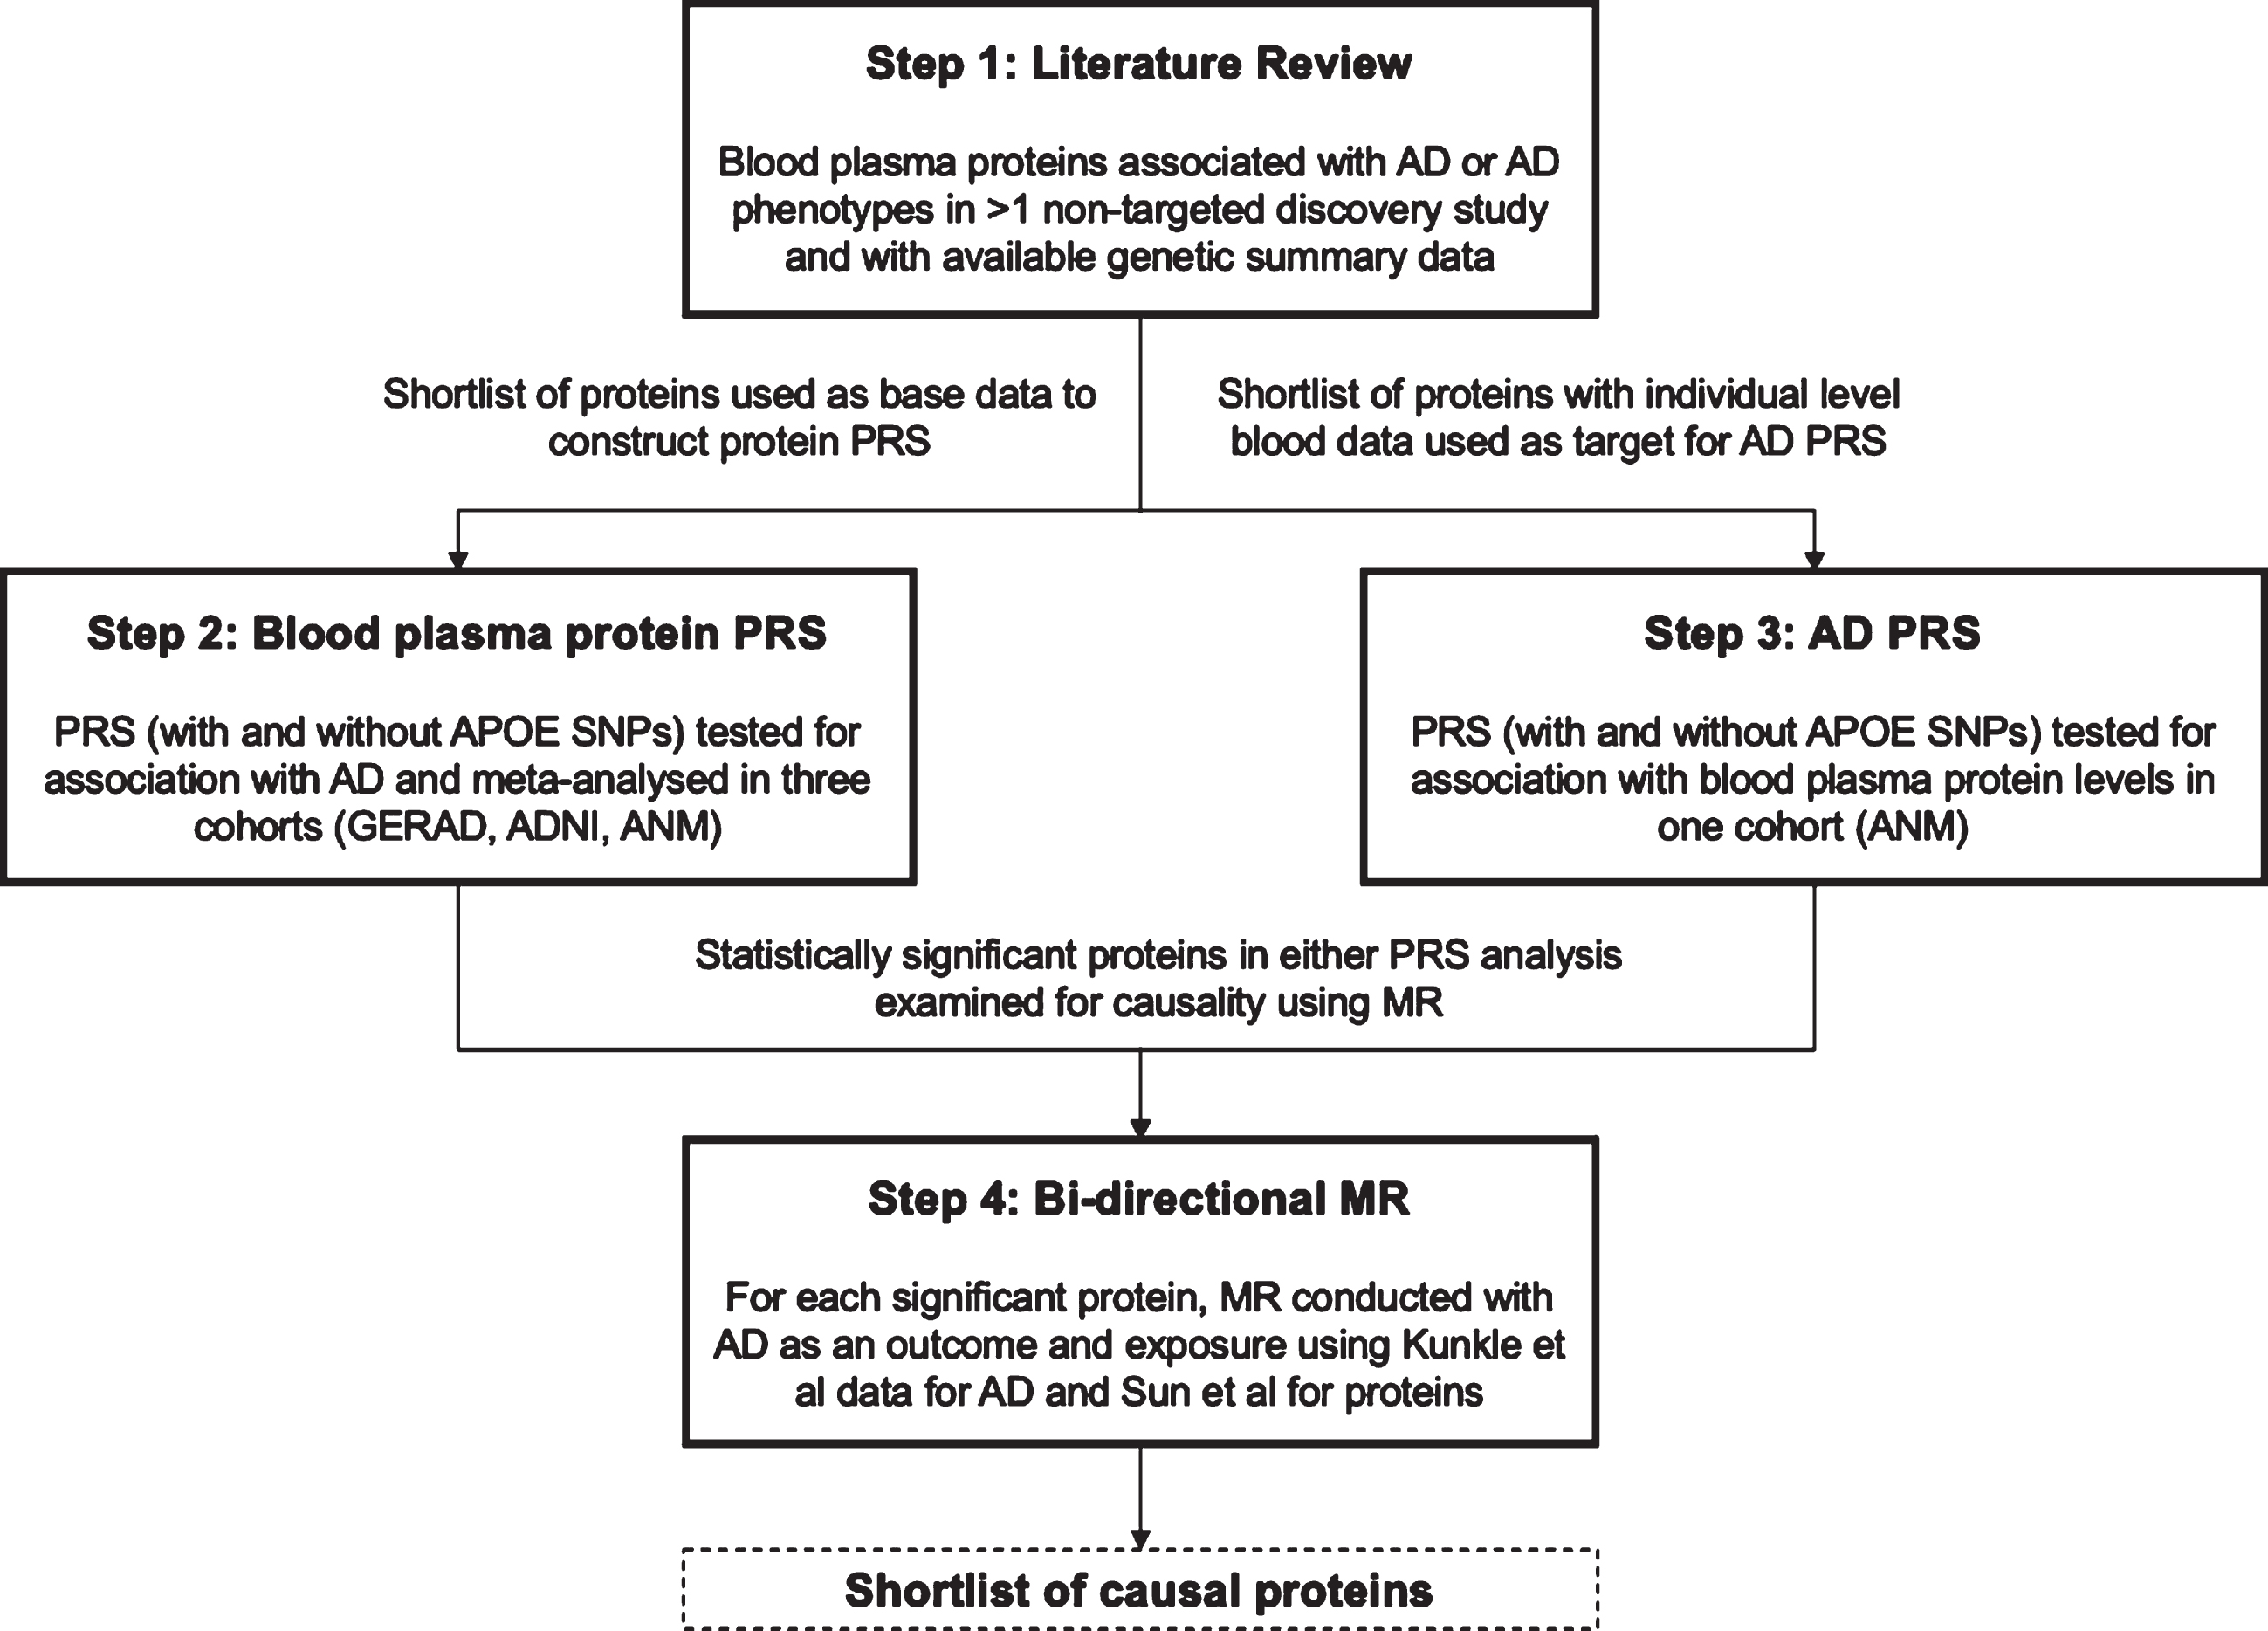 Illustrative overview of study design outlining the four key steps in the study workflow: literature review, plasma protein PRS, AD PRS, and bi-directional MR.